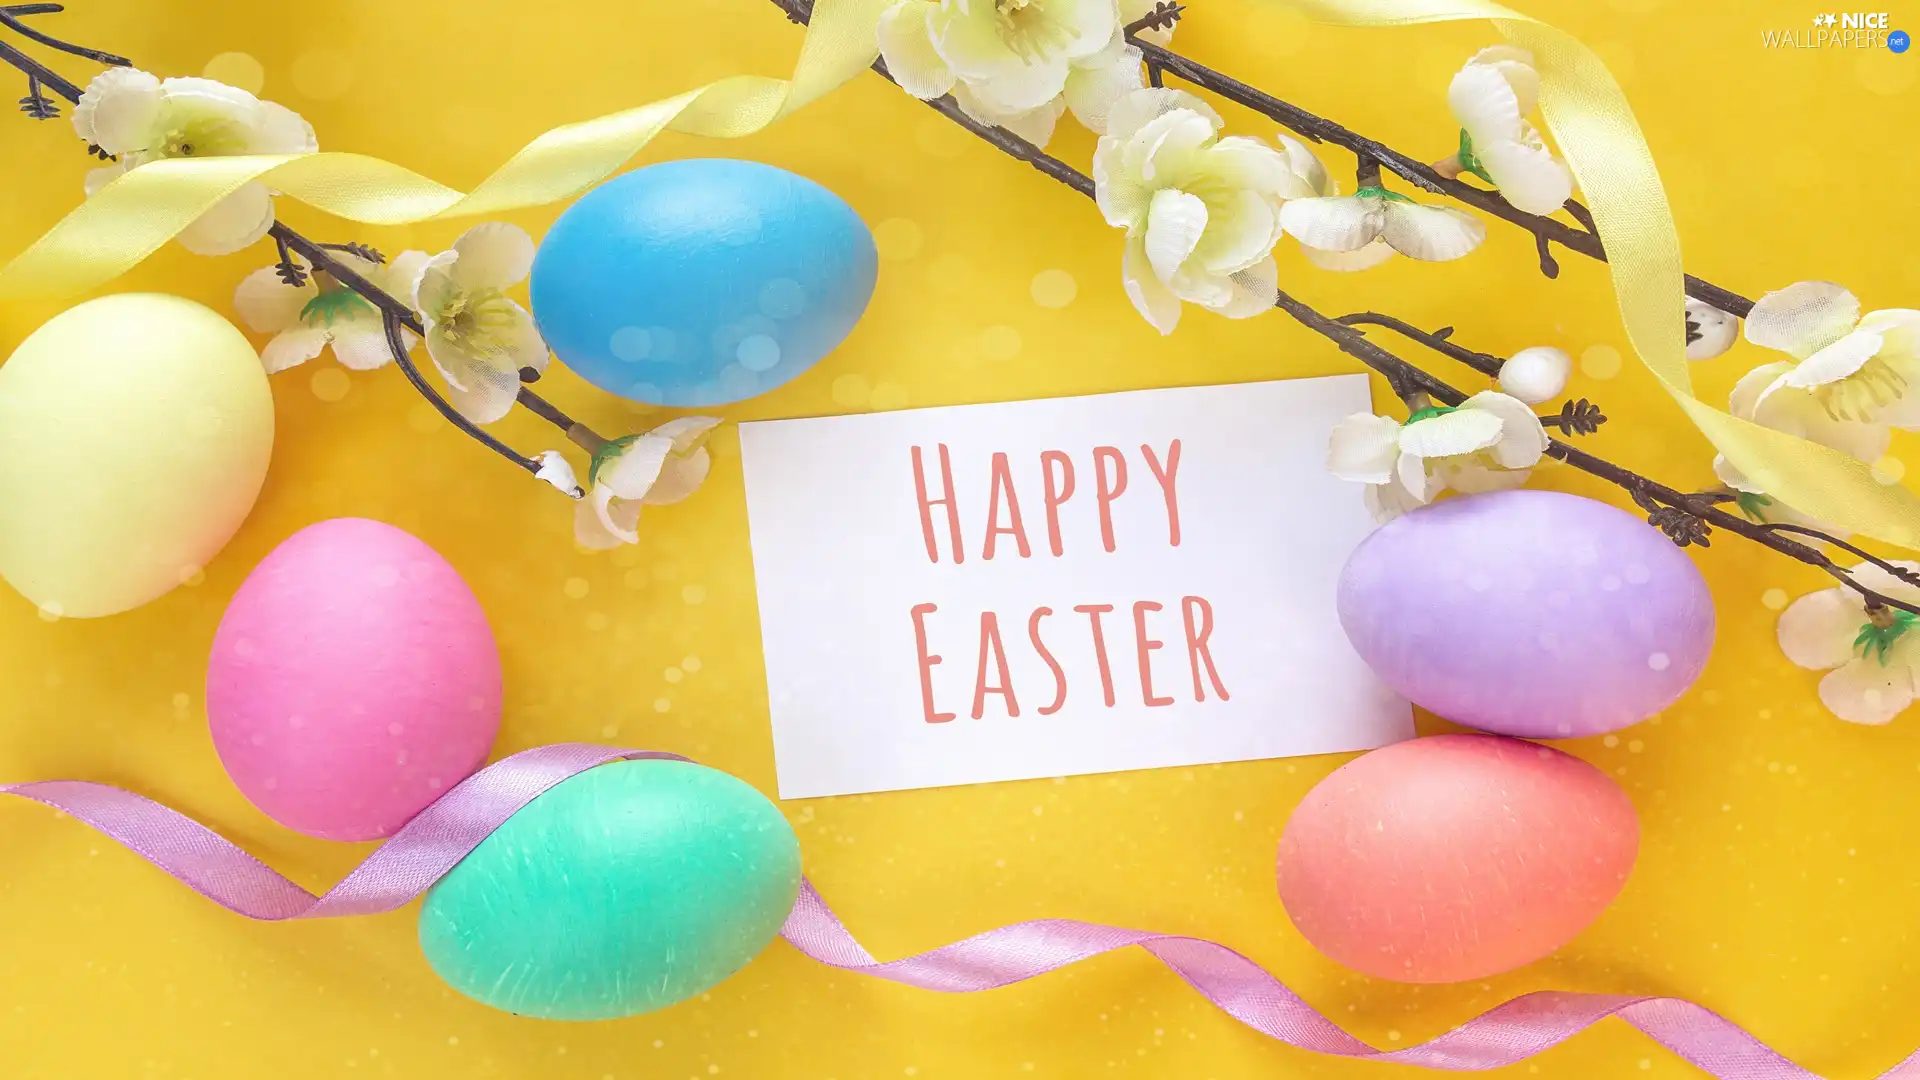 Twigs, Easter, text, Happy Easter, Ribbons, eggs